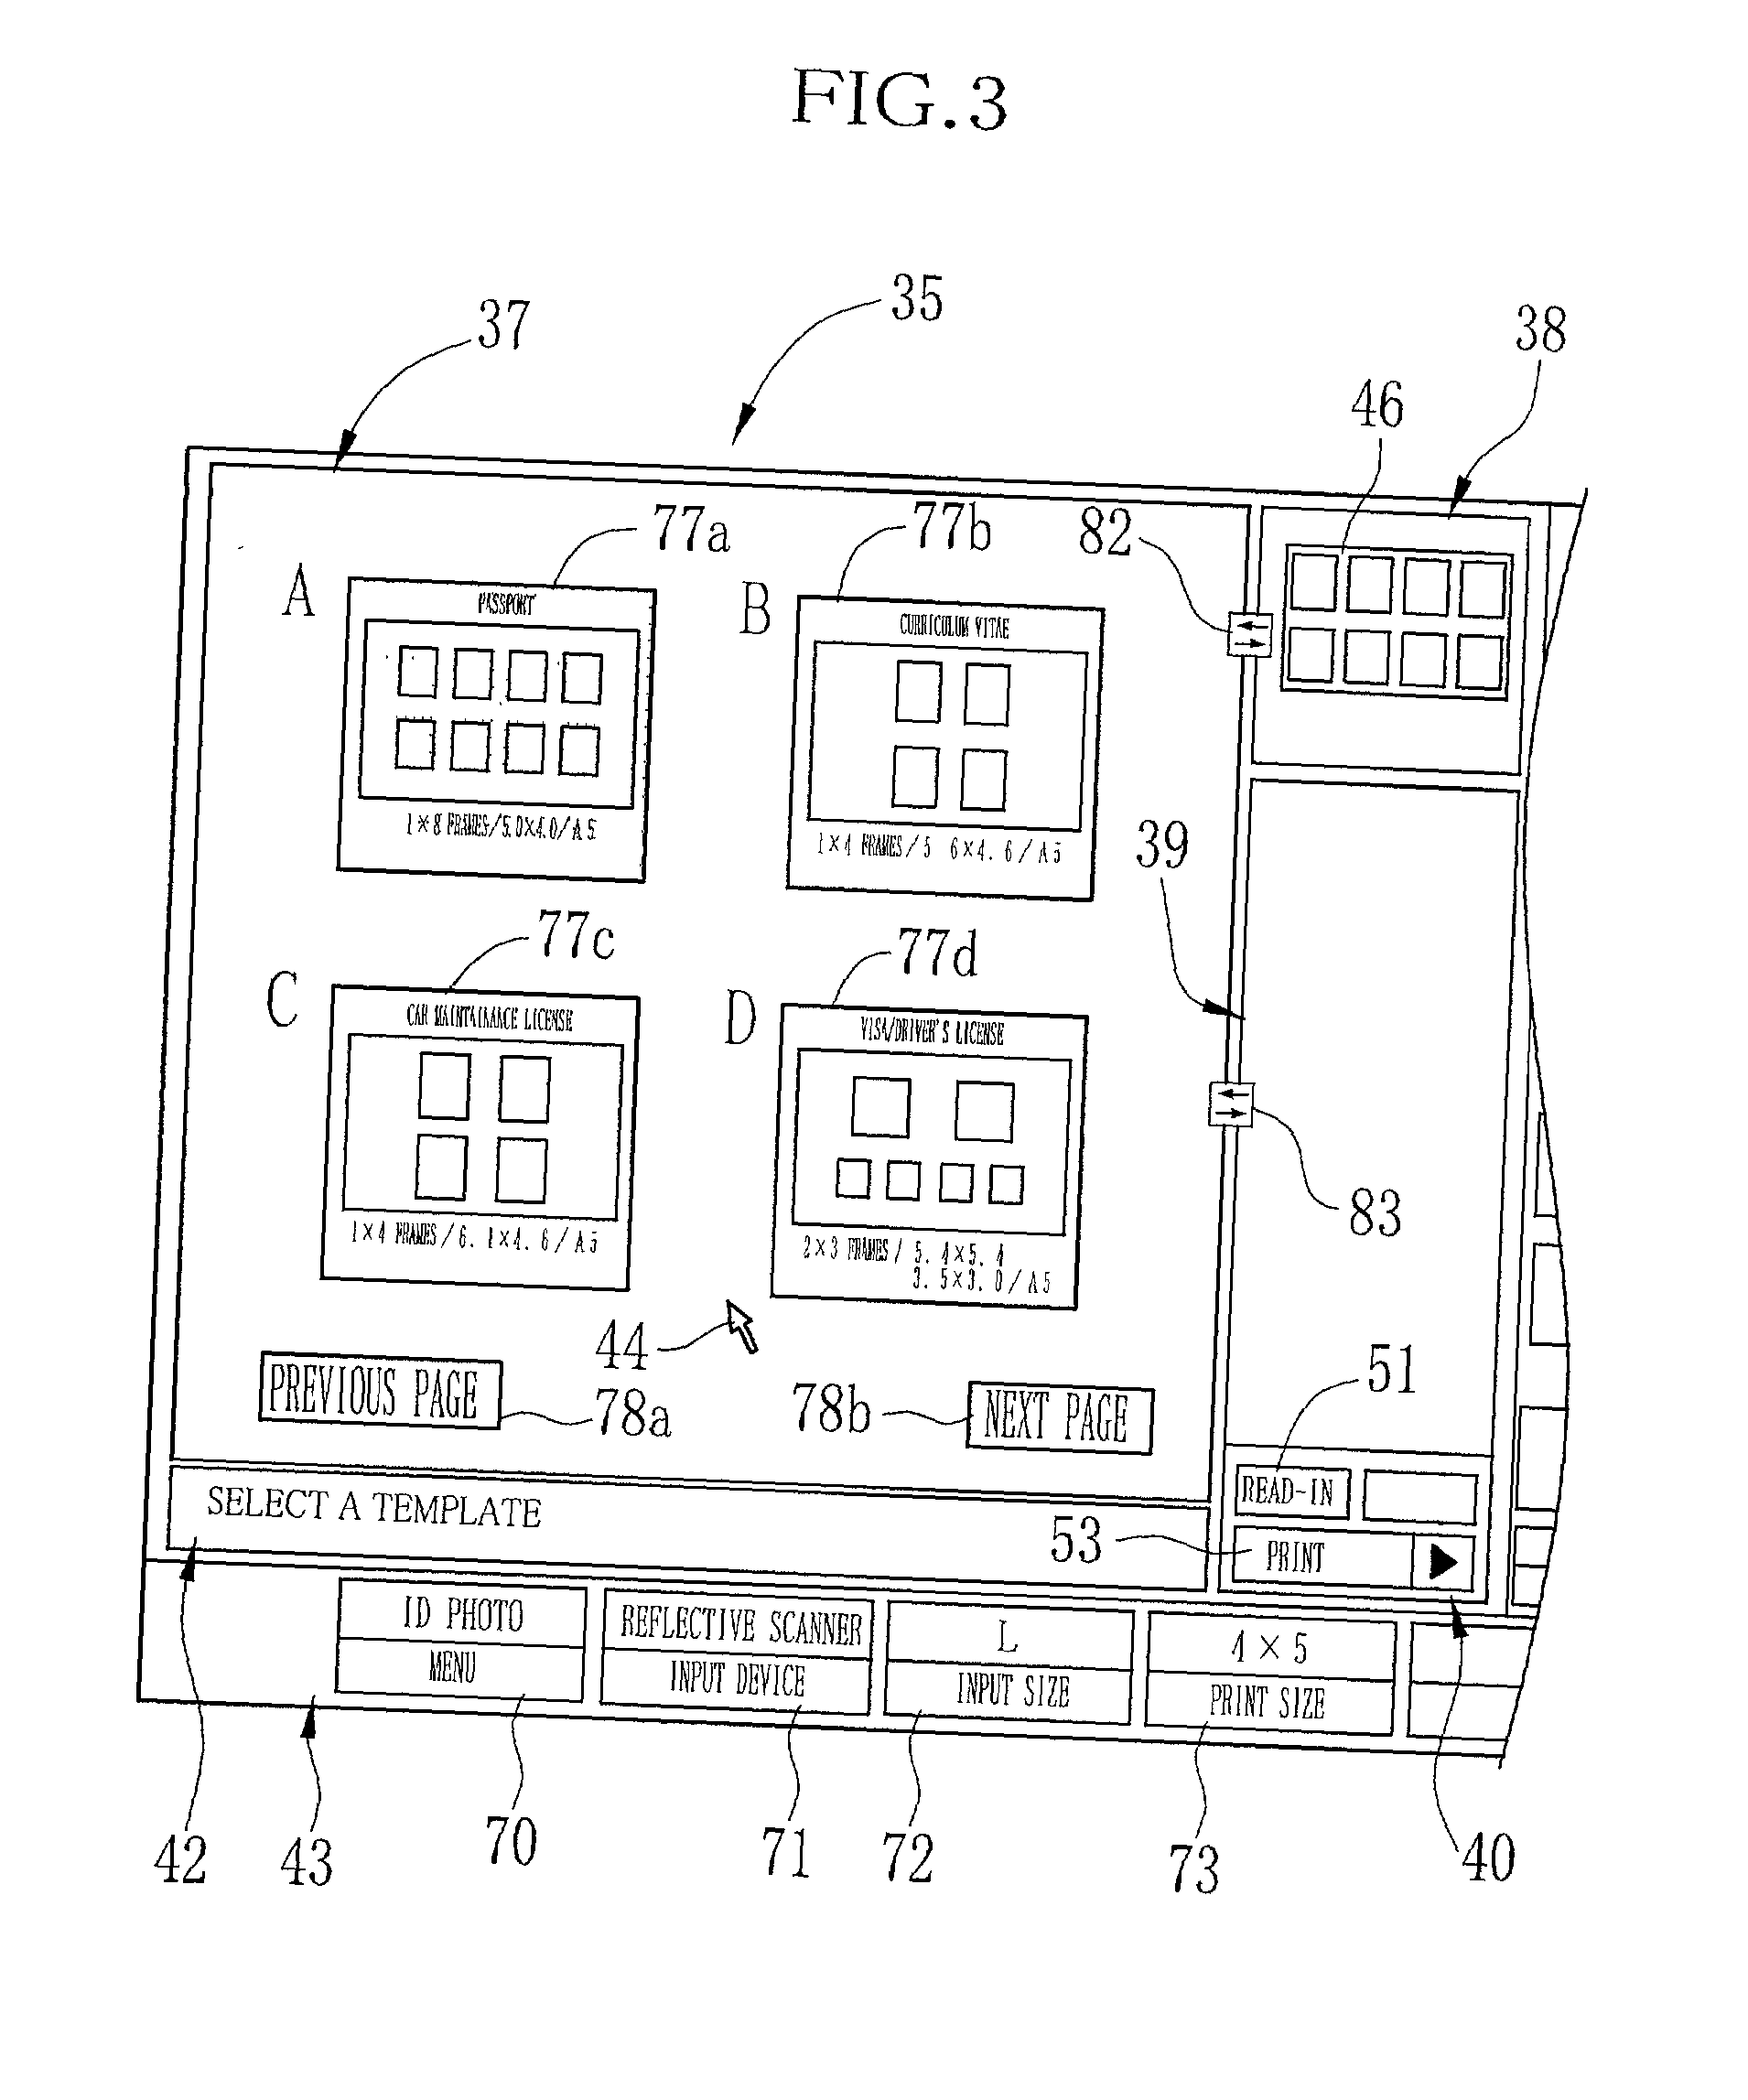 Image croppin and synthesizing method, and imaging apparatus